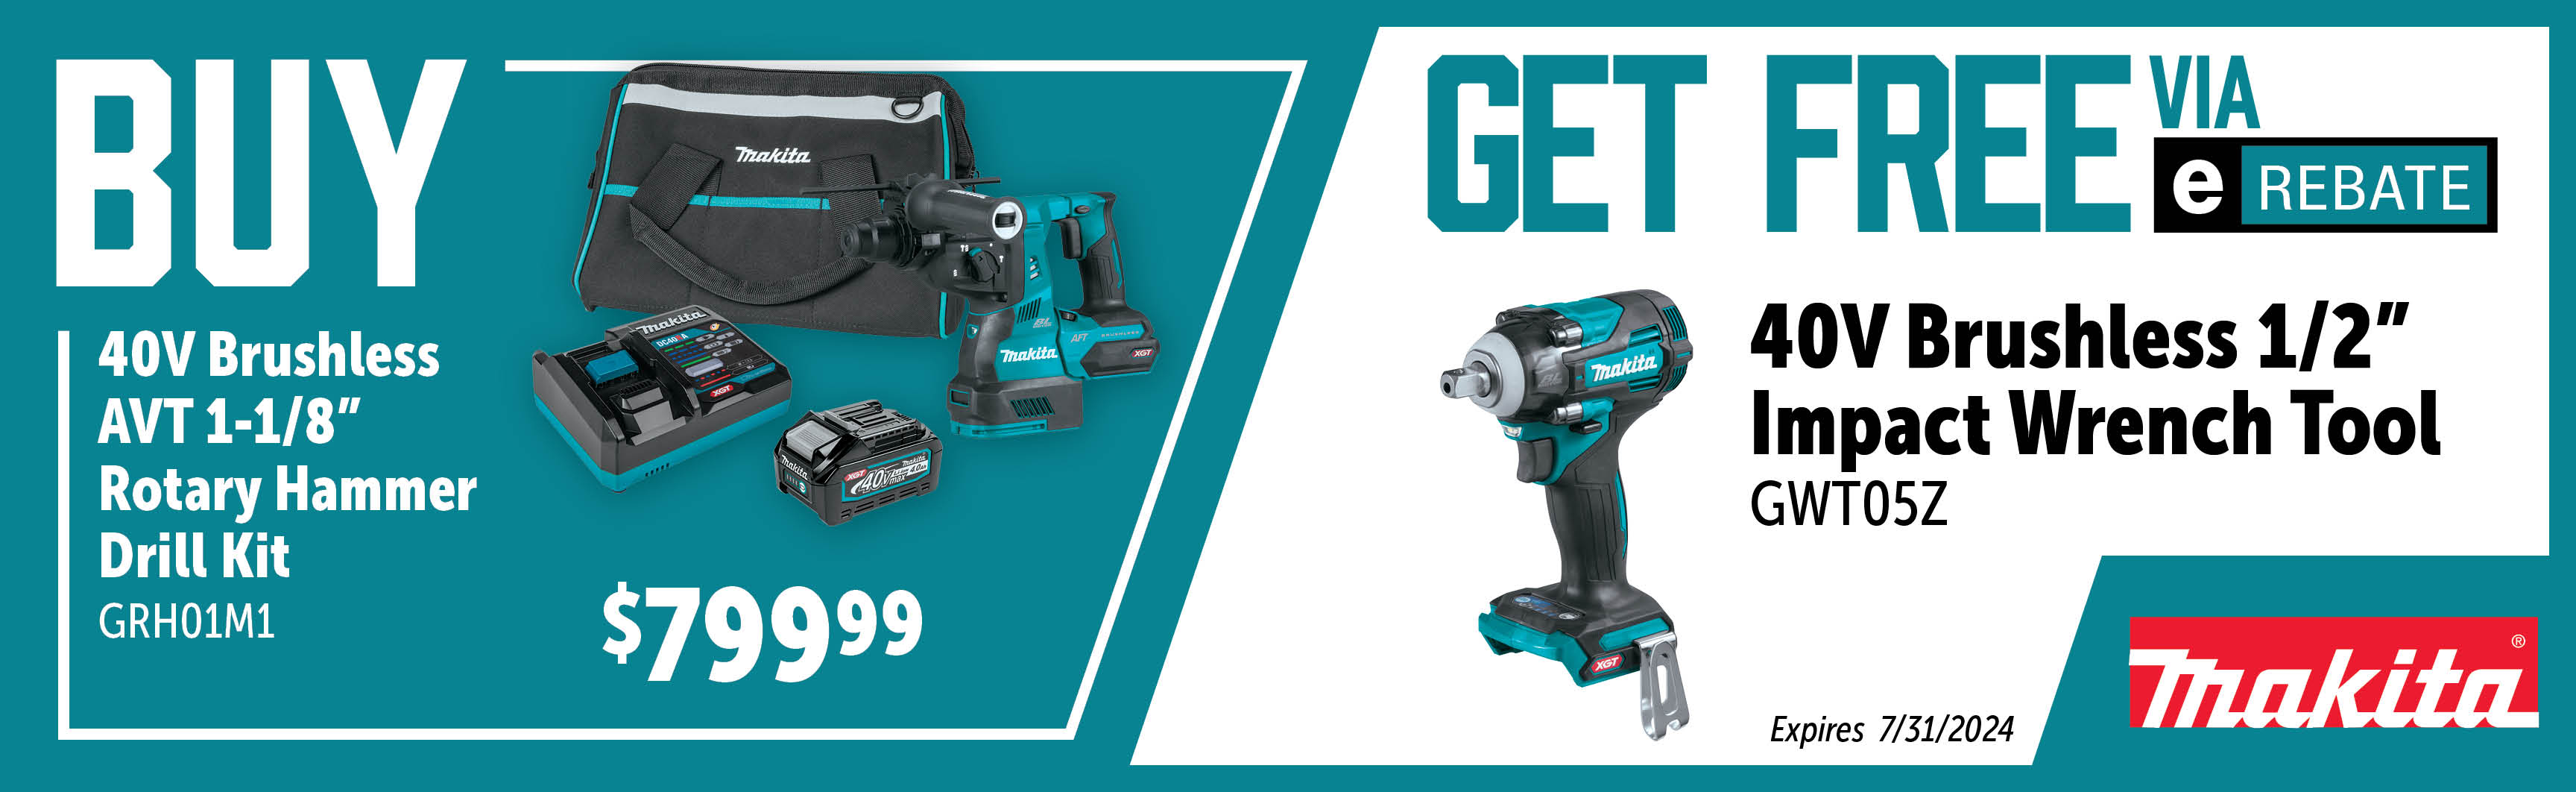 Makita May - July: Buy a GRH01M1 and Get a Free GWT05Z Via E-Rebate